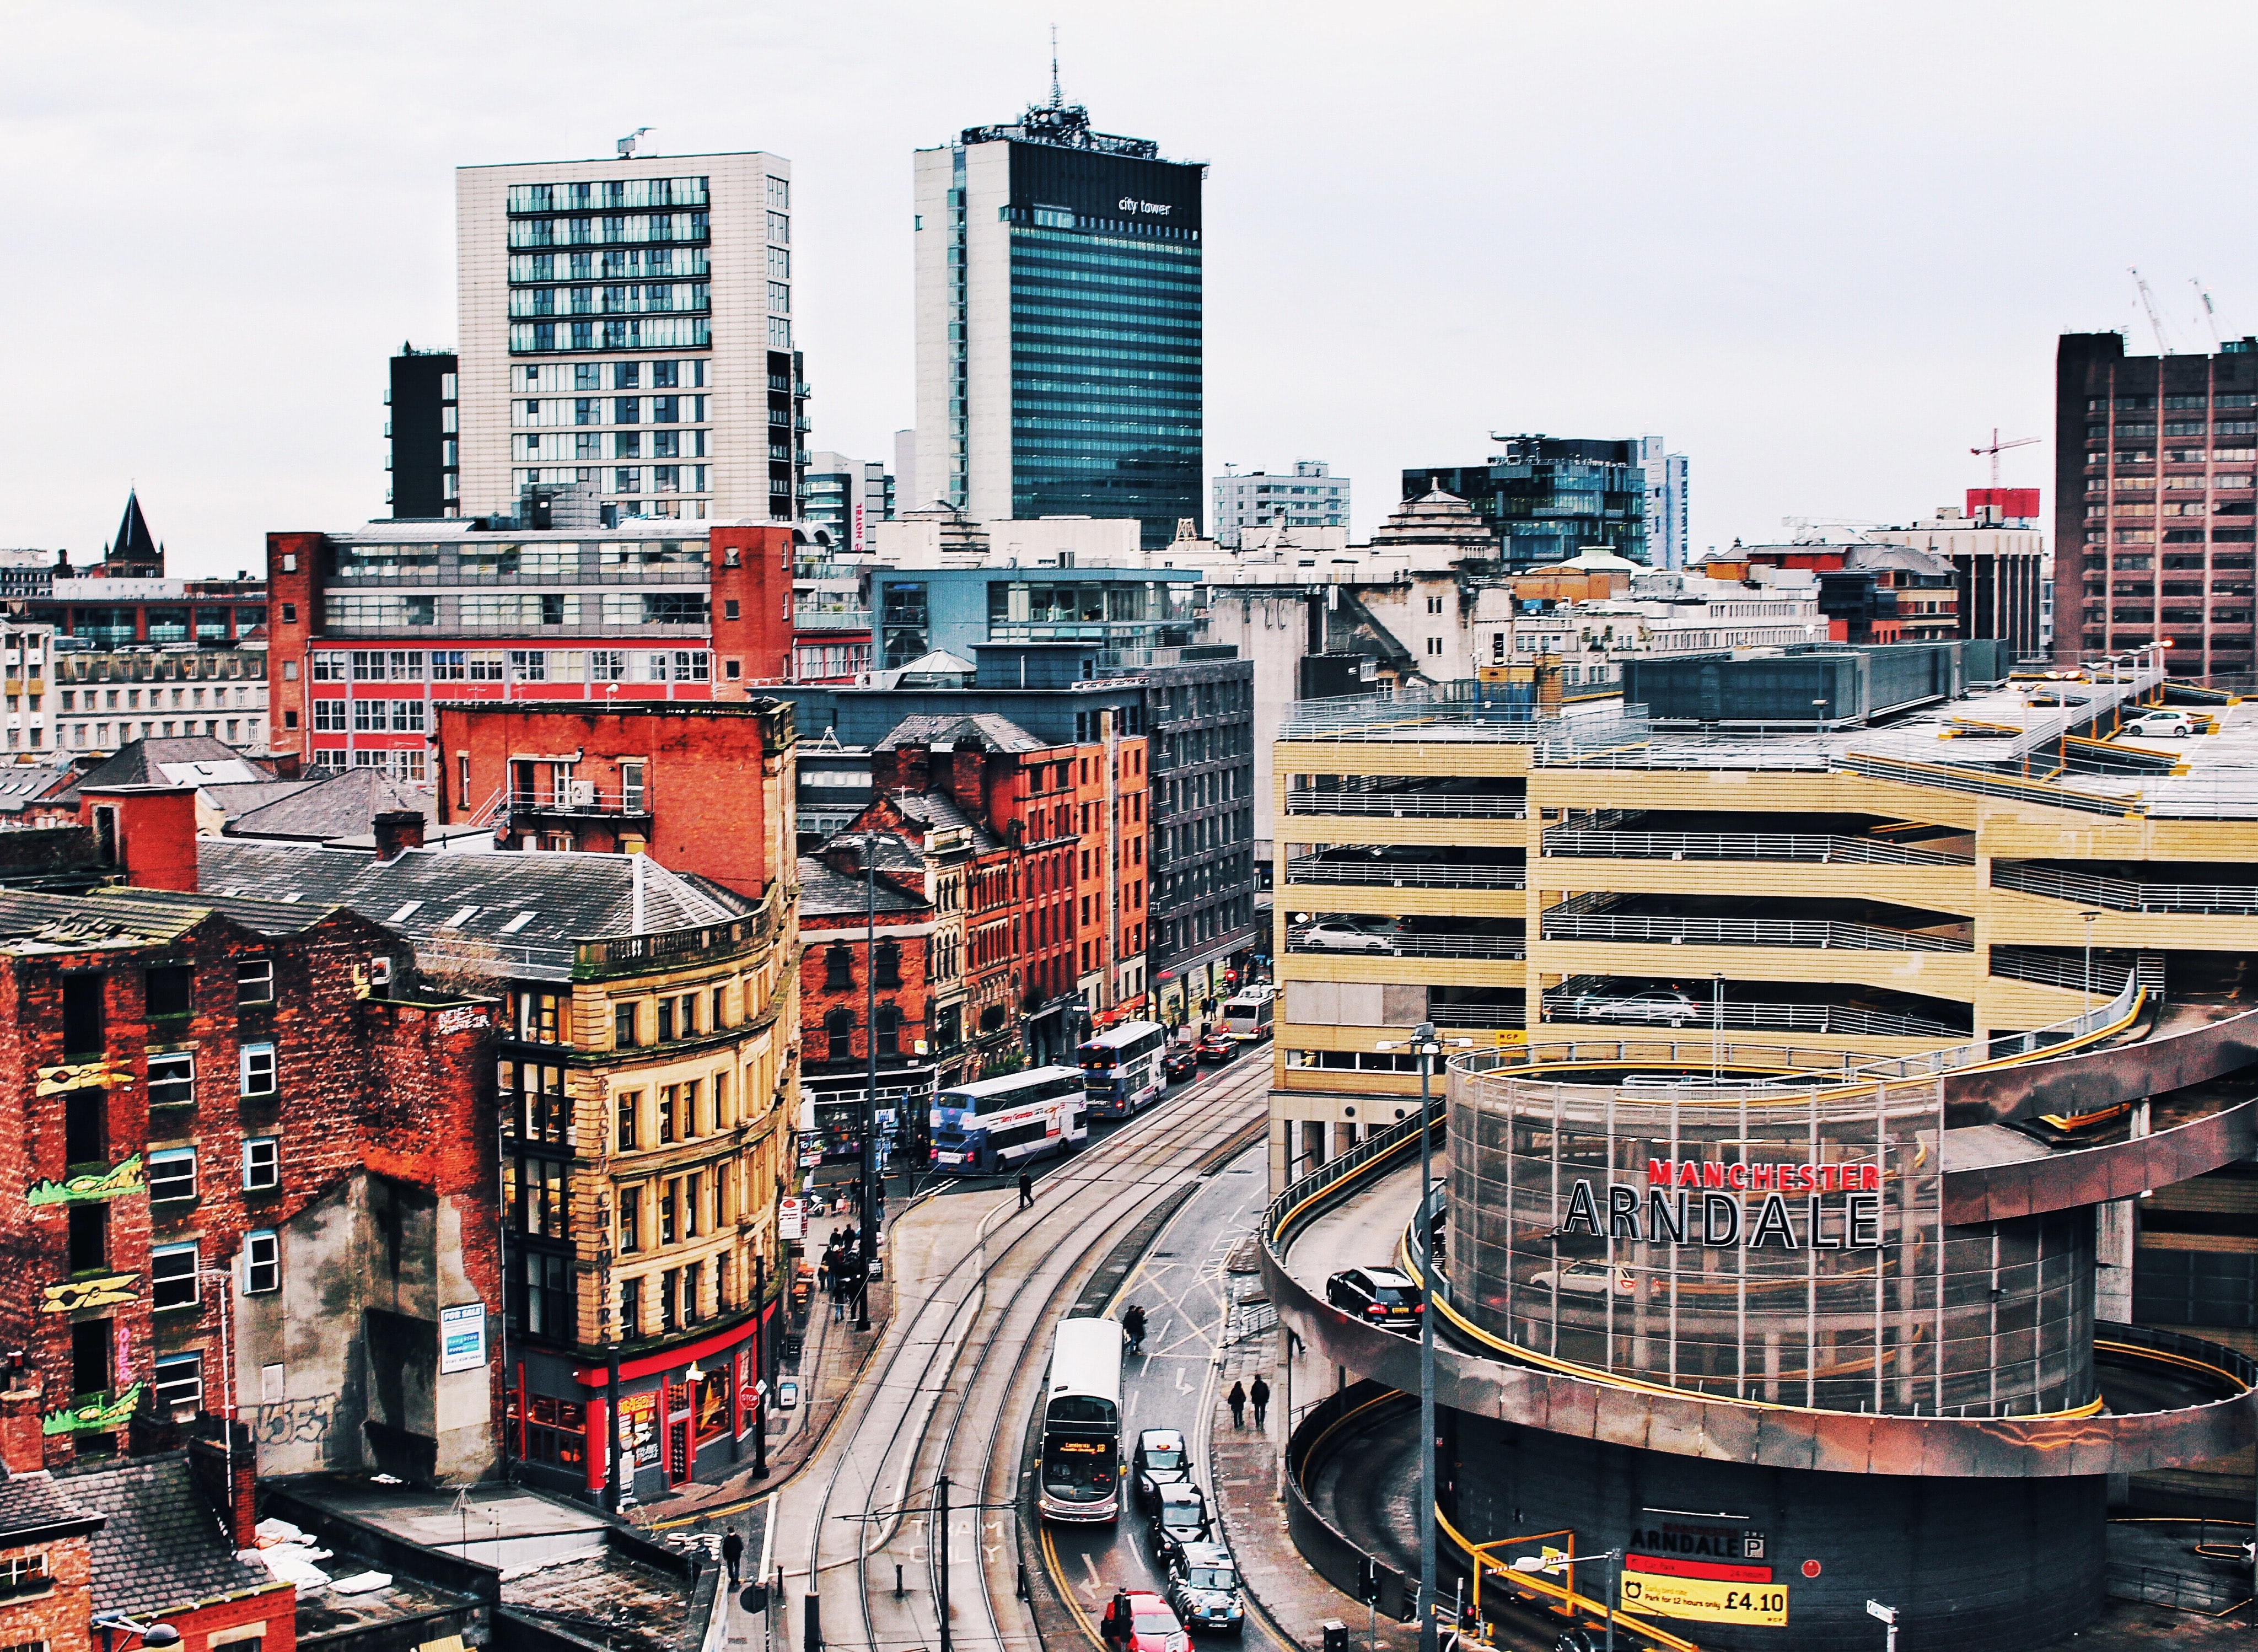 5 Reasons Manchester City Centre is a Buy-to-Let Hotspot